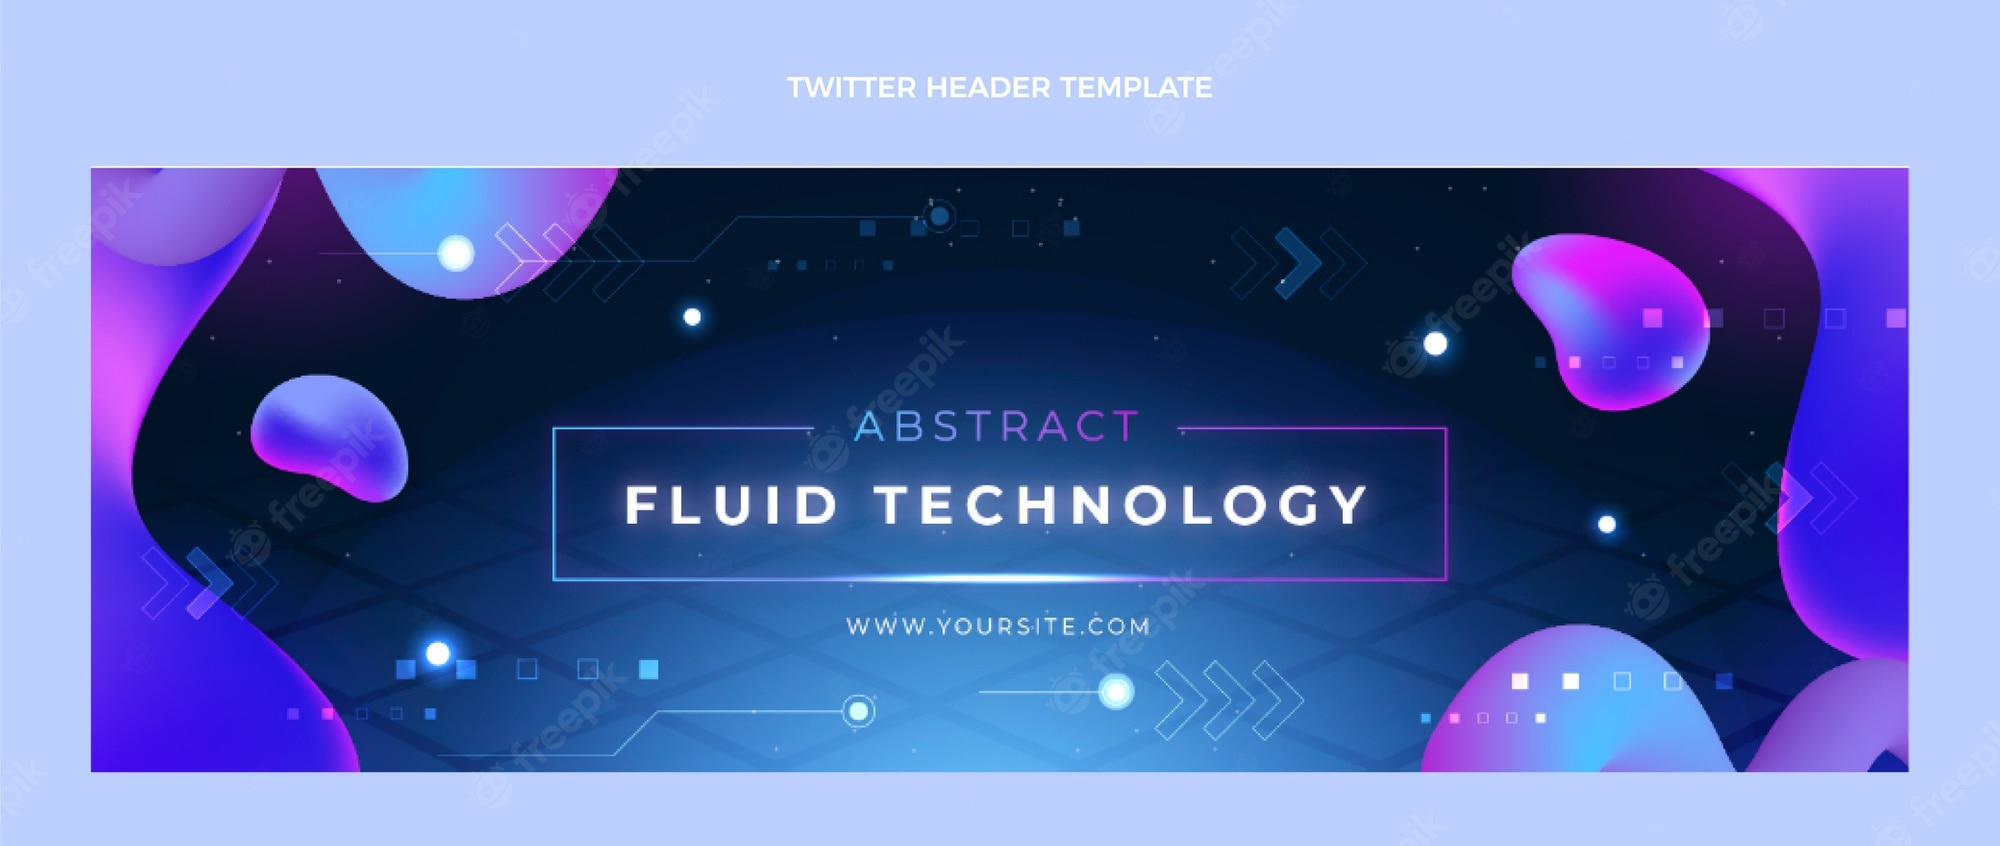 Twitter Header Images  Free Vectors, Stock Photos & PSD Pertaining To Twitter Banner Template Psd